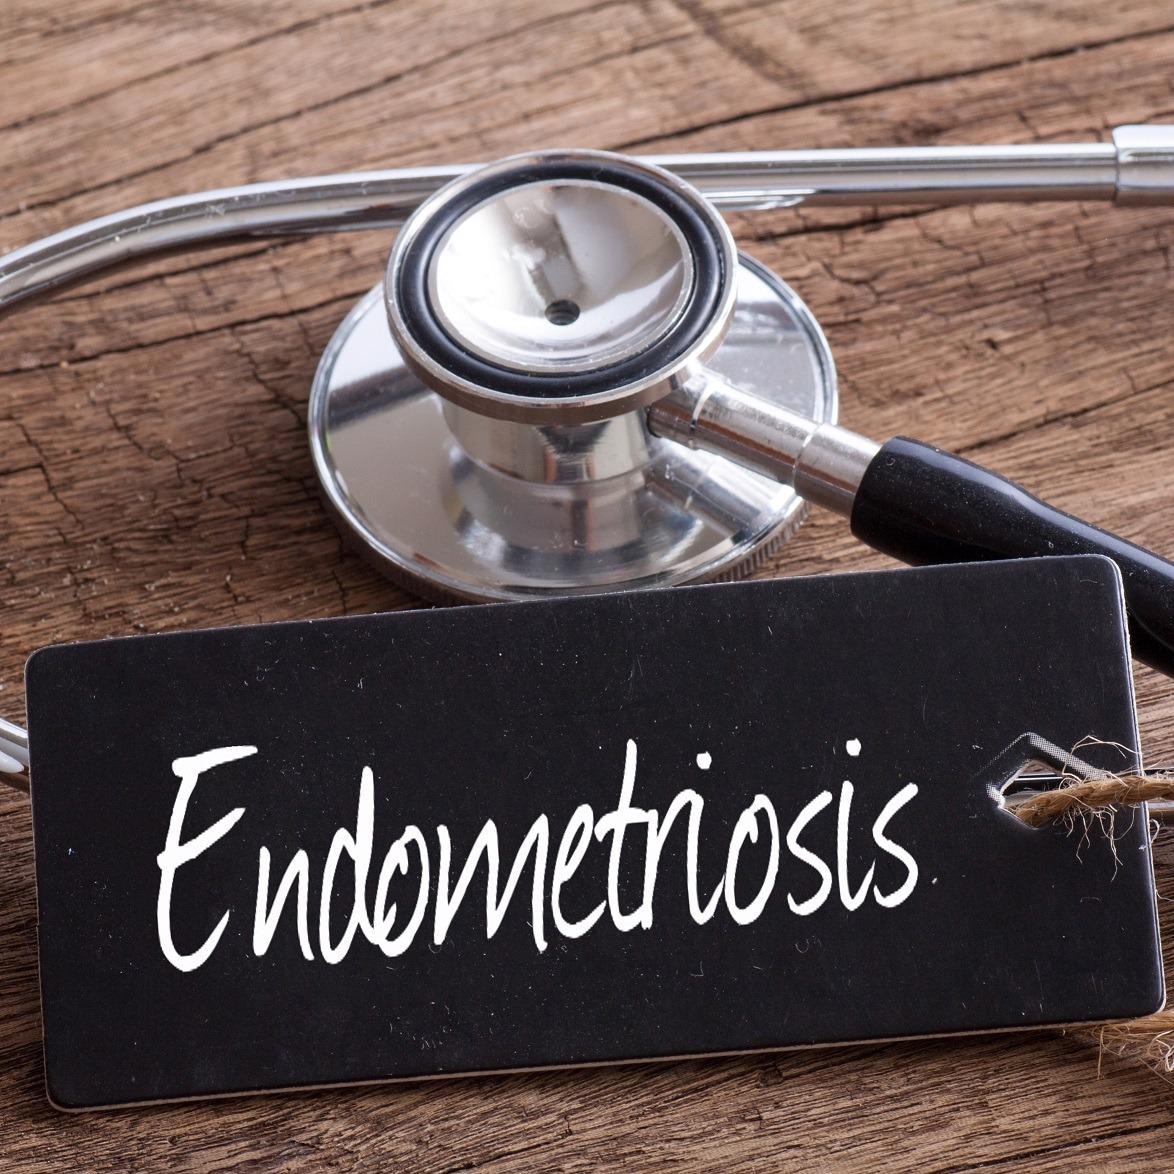 Sonographers take 64% more time to scan for endometriosis than routine pelvic ultrasounds, study shows